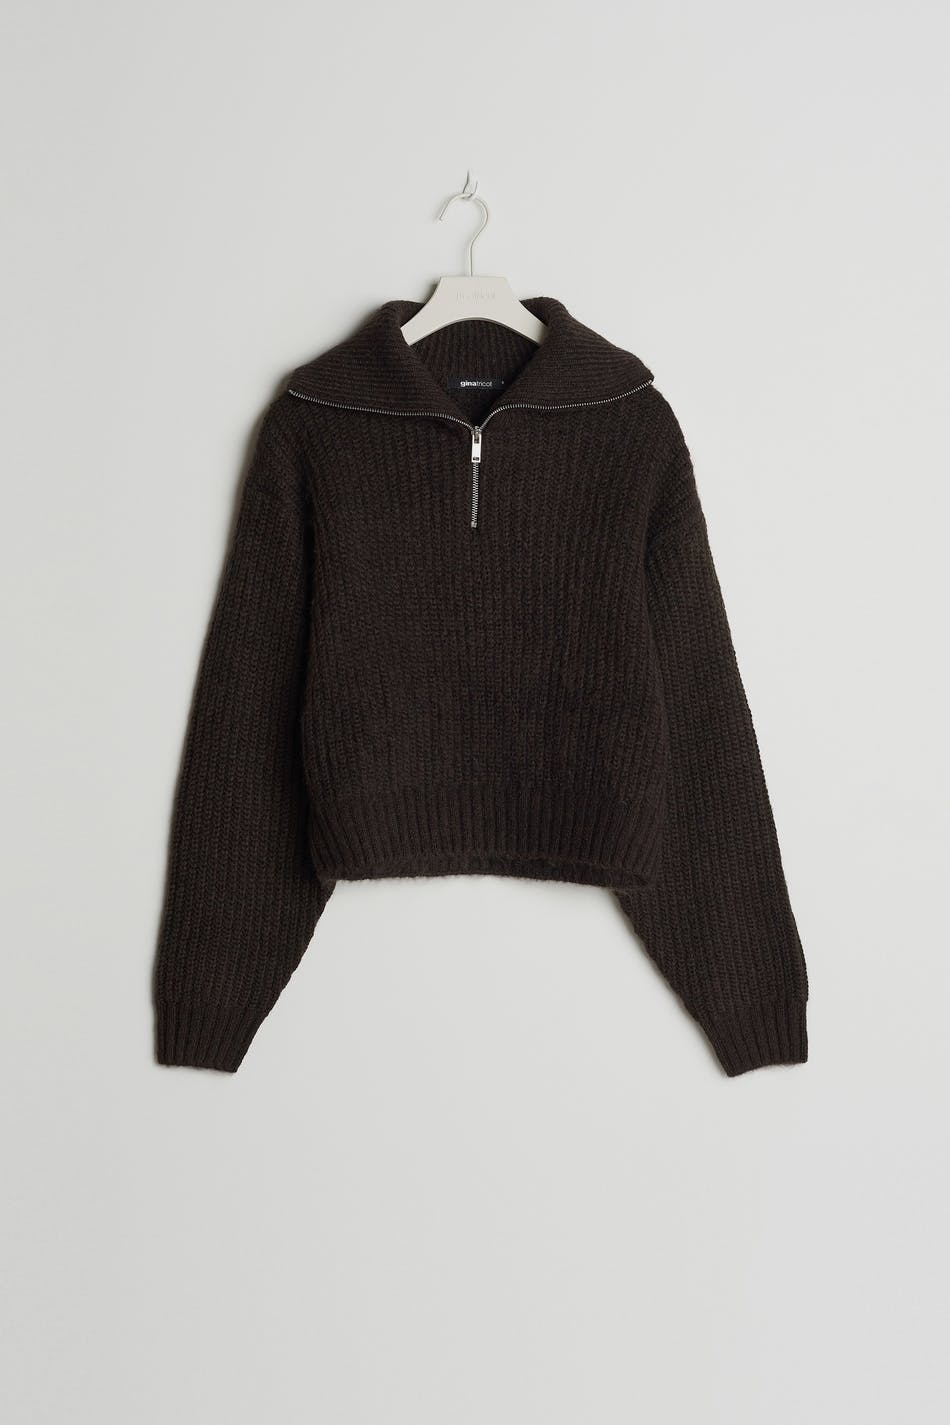 Leslie petite knitted sweater